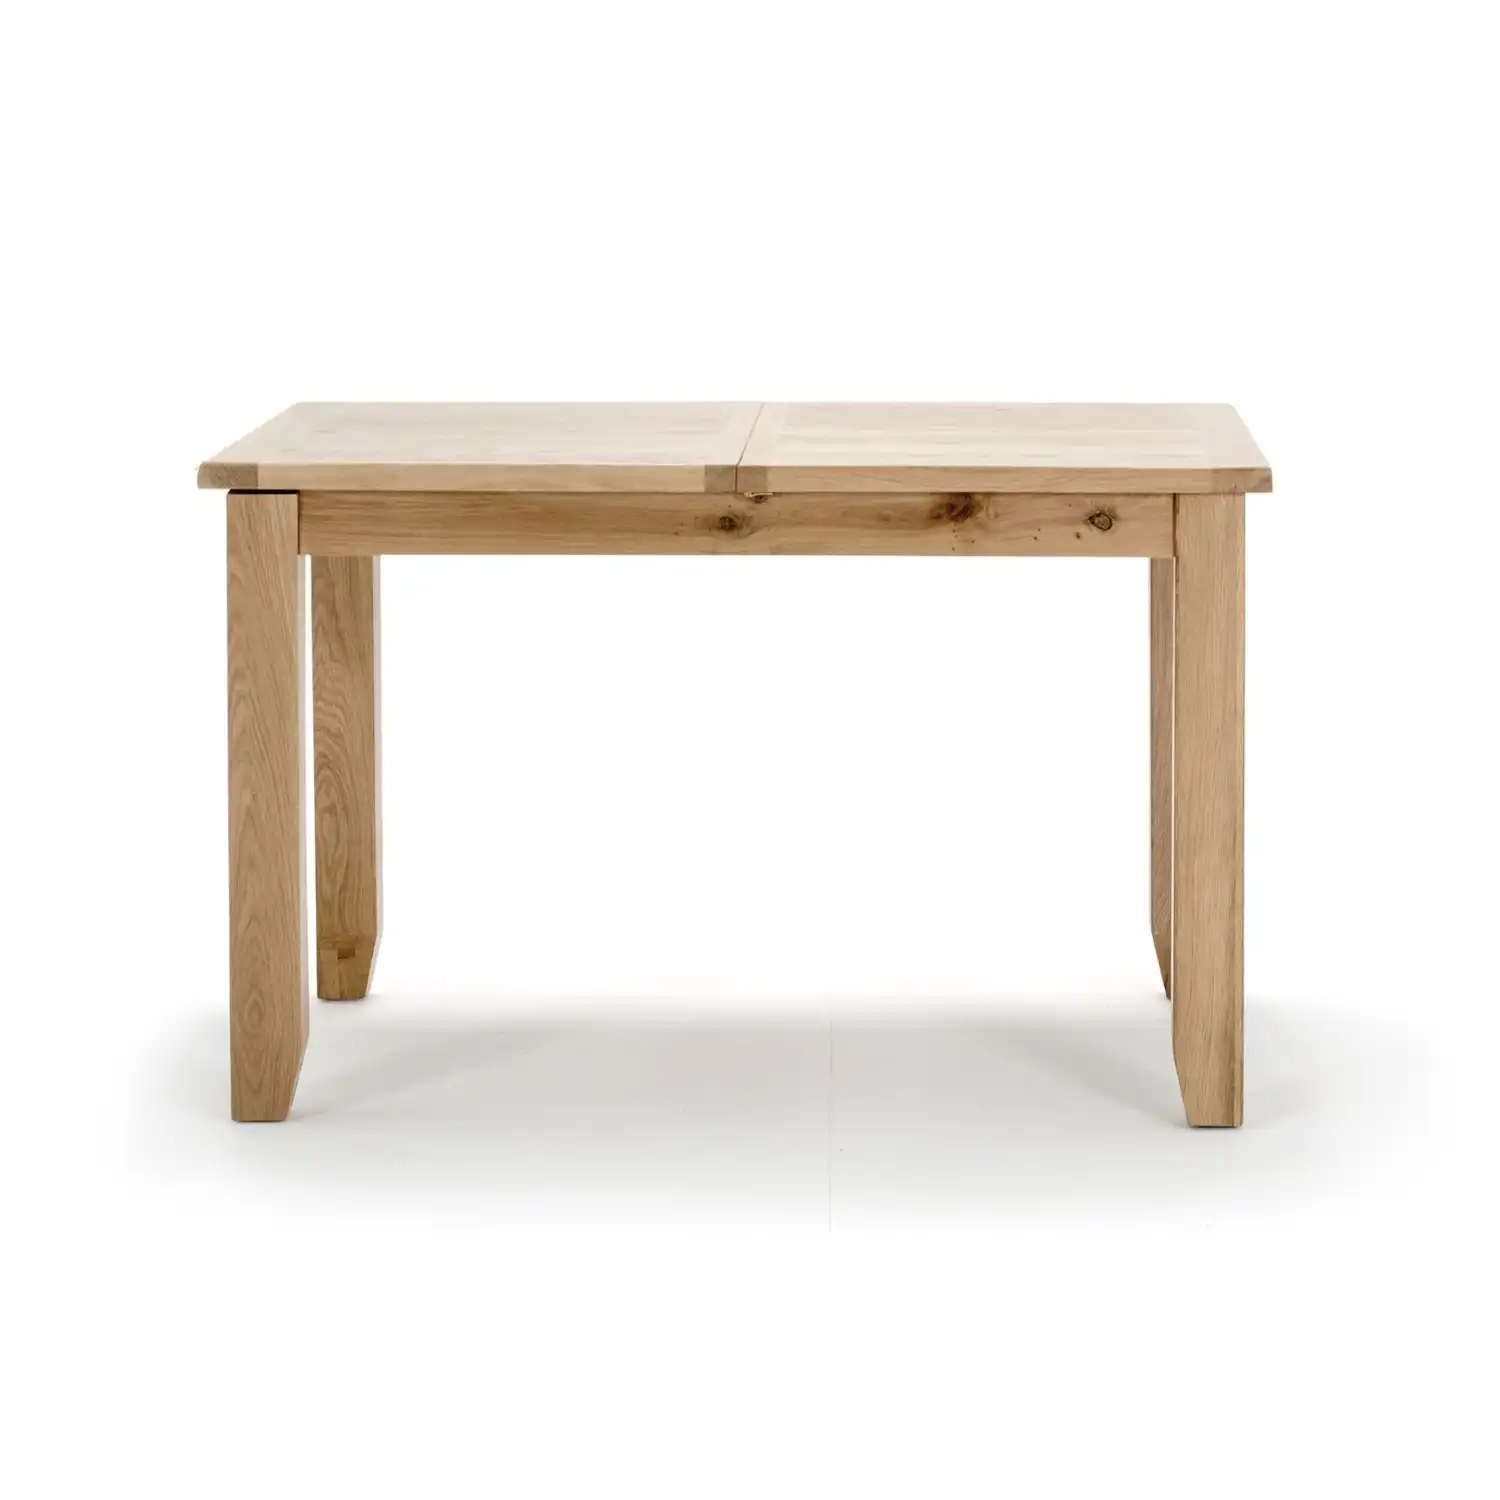 Rustic Oak Extending Dining Table 120 to 165cm